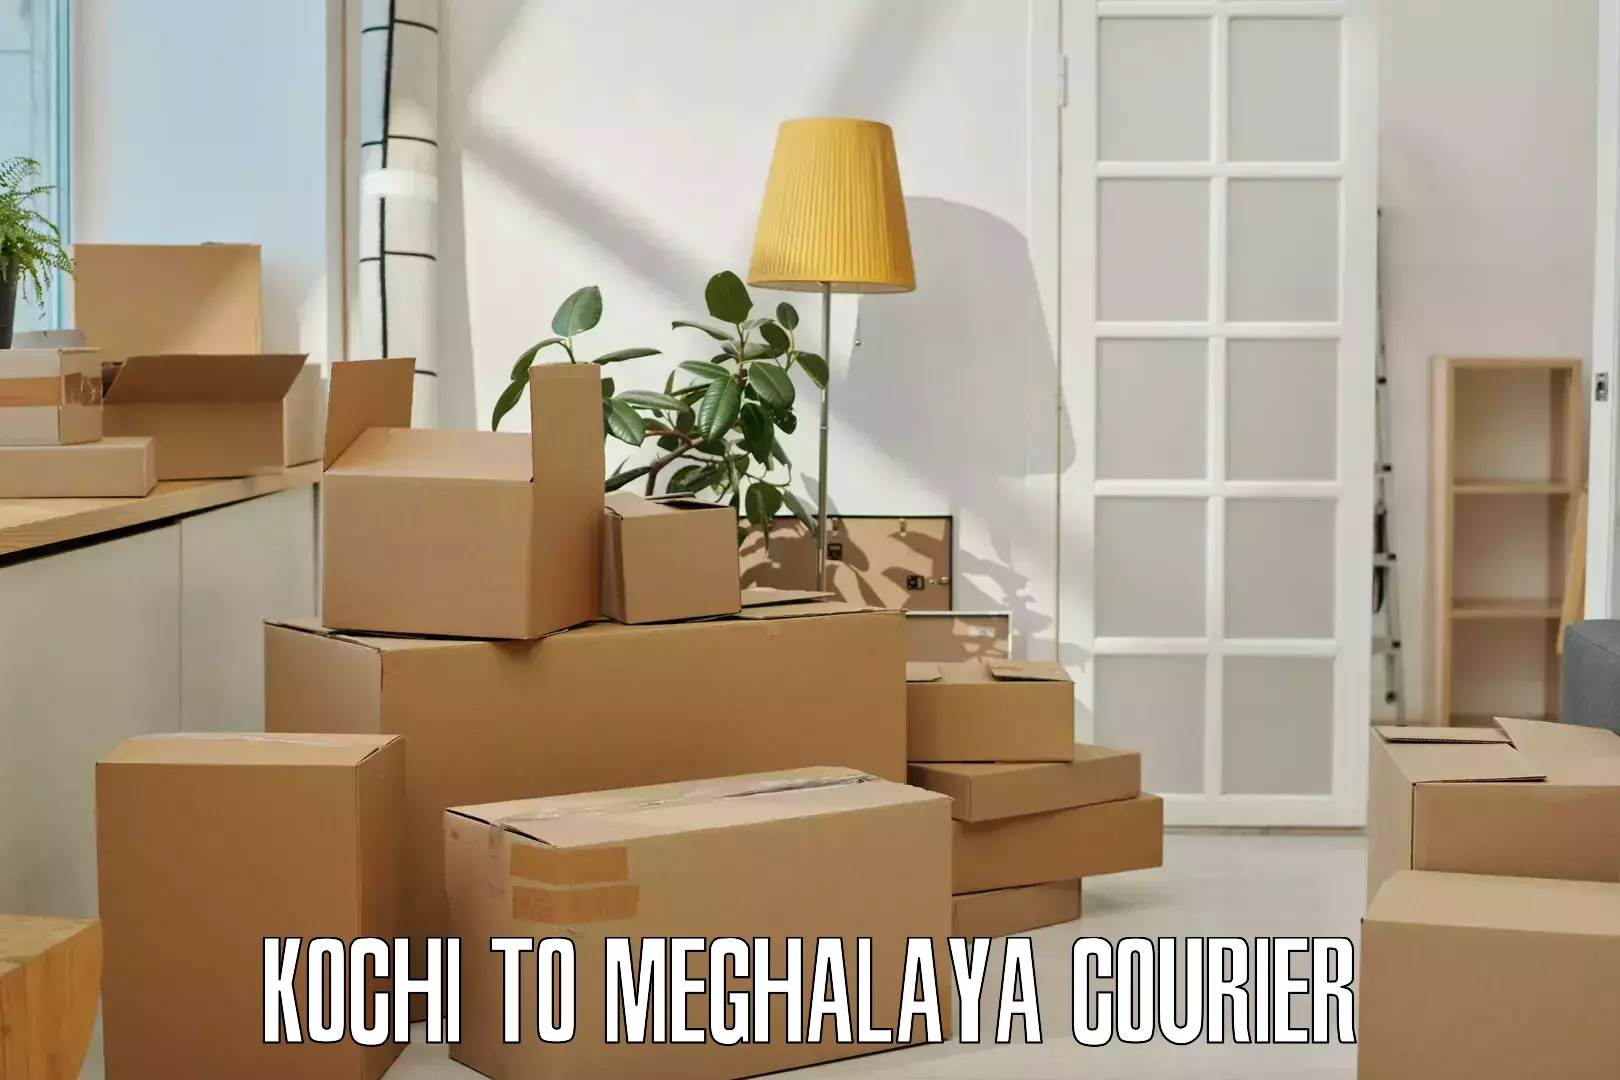 Round-the-clock parcel delivery Kochi to Shillong